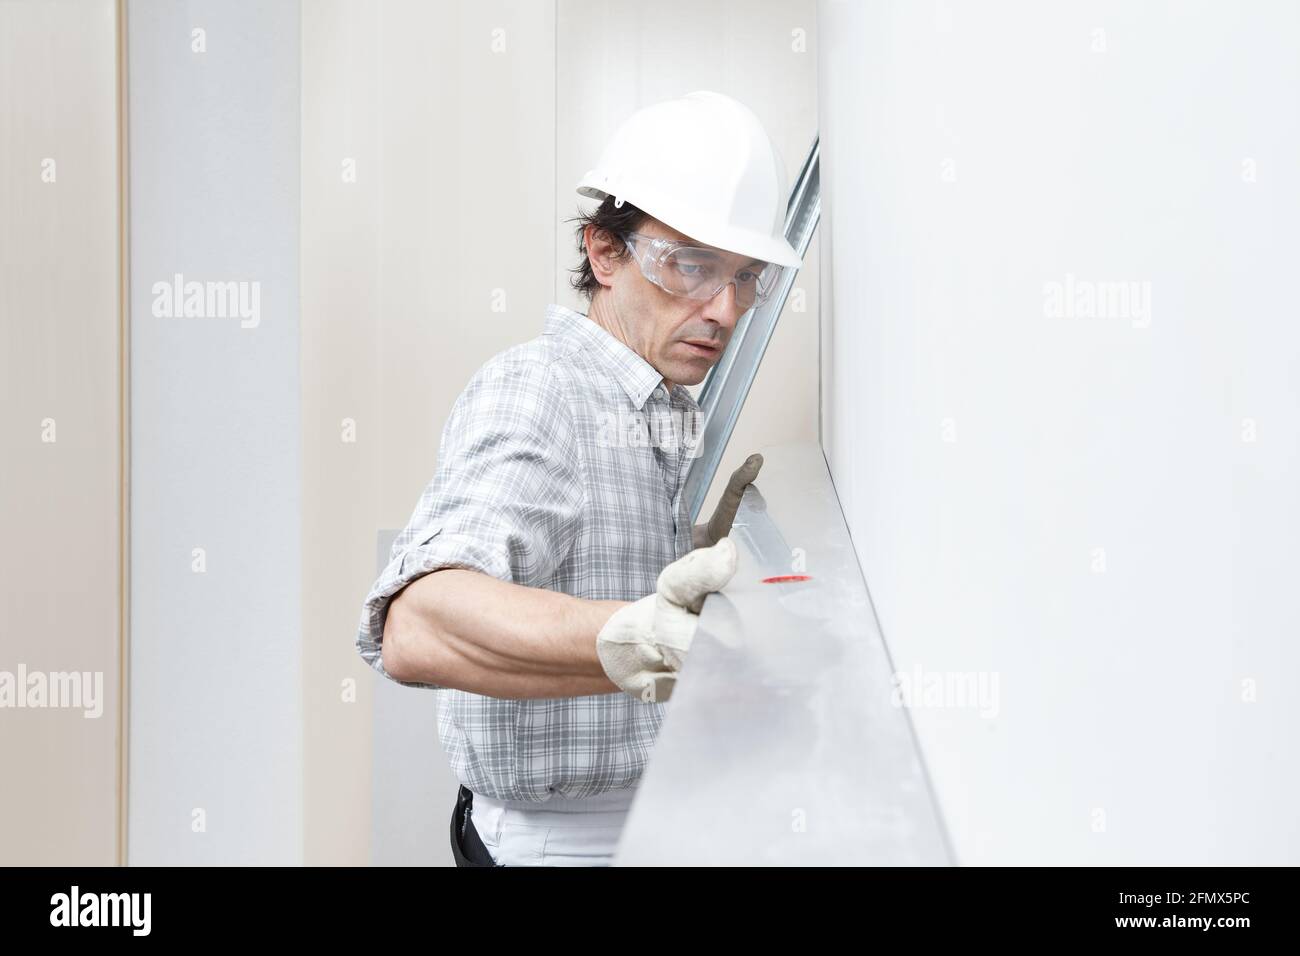 Man drywall worker or plasterer checking level of white plasterboard wall with bubble level at construction site. Wearing white hardhat, work gloves a Stock Photo